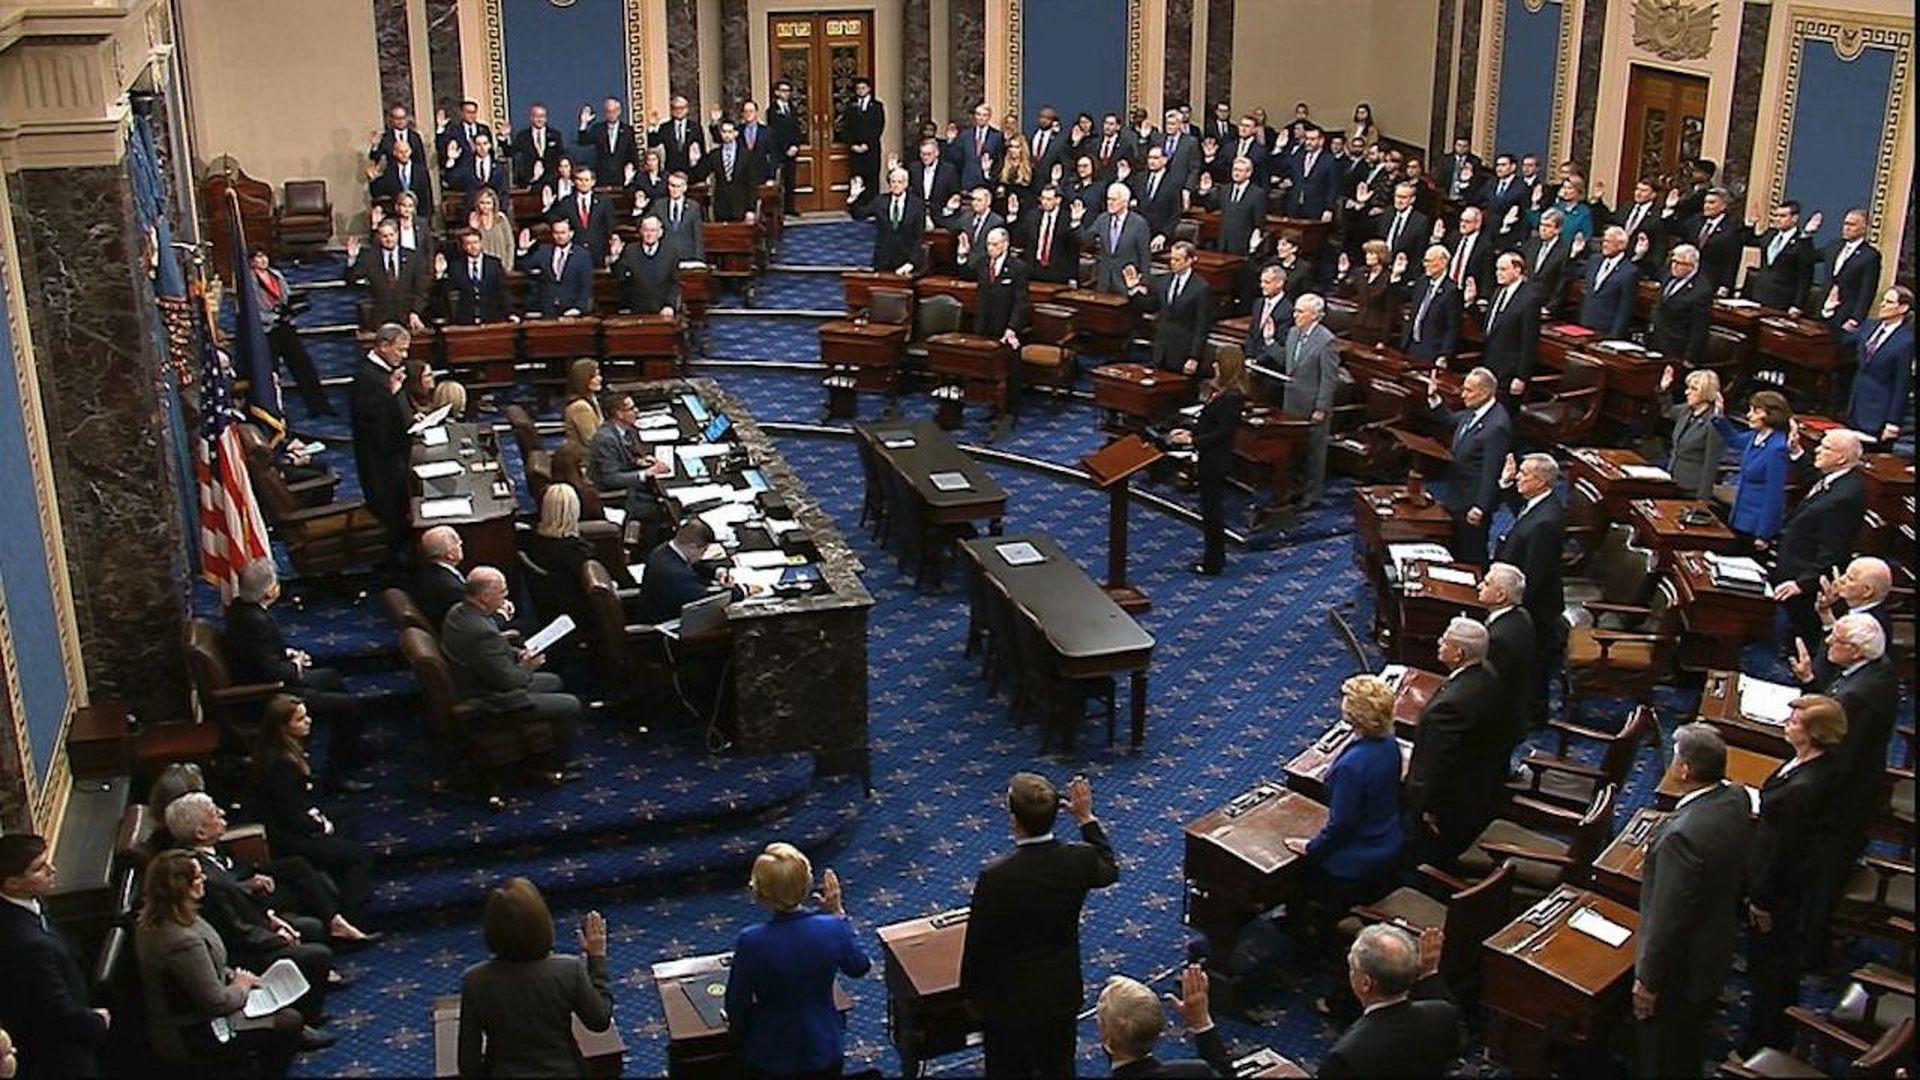 John Roberts swears in members of the Senate for the impeachment trial against President Trump. 